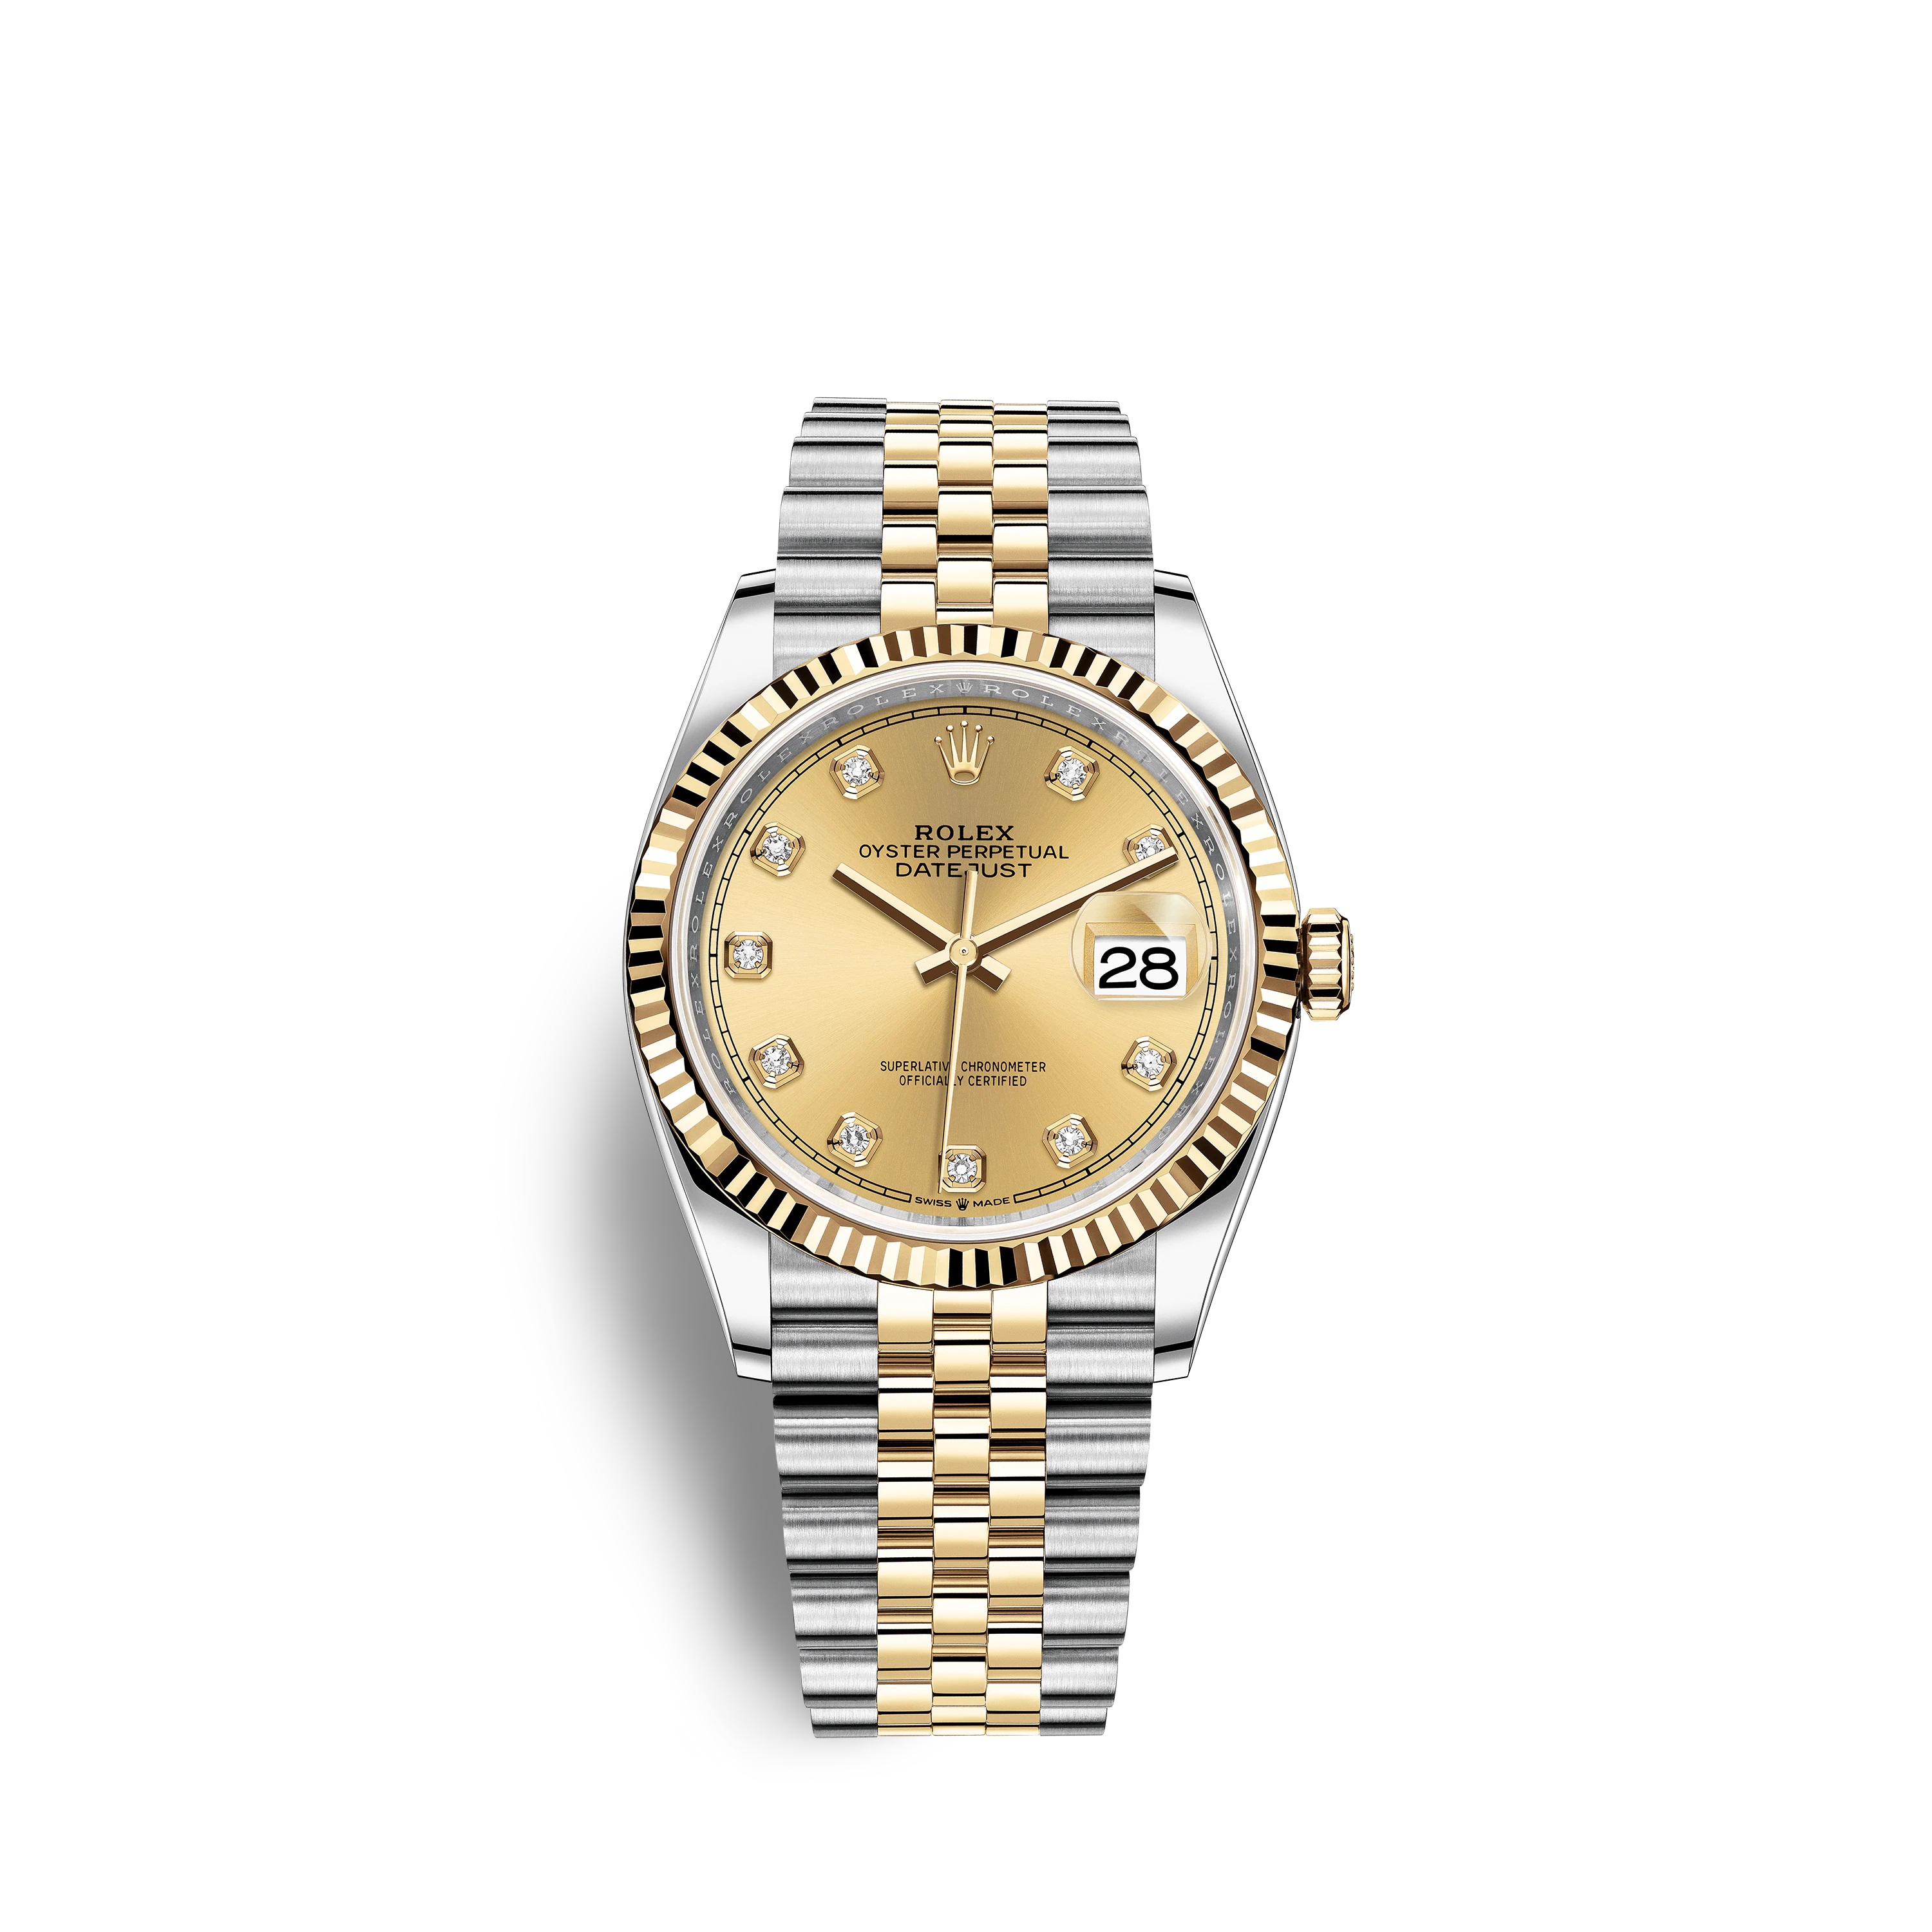 Datejust 36 126233 Gold & Stainless Steel Watch (Champagne-Colour Set with Diamonds)